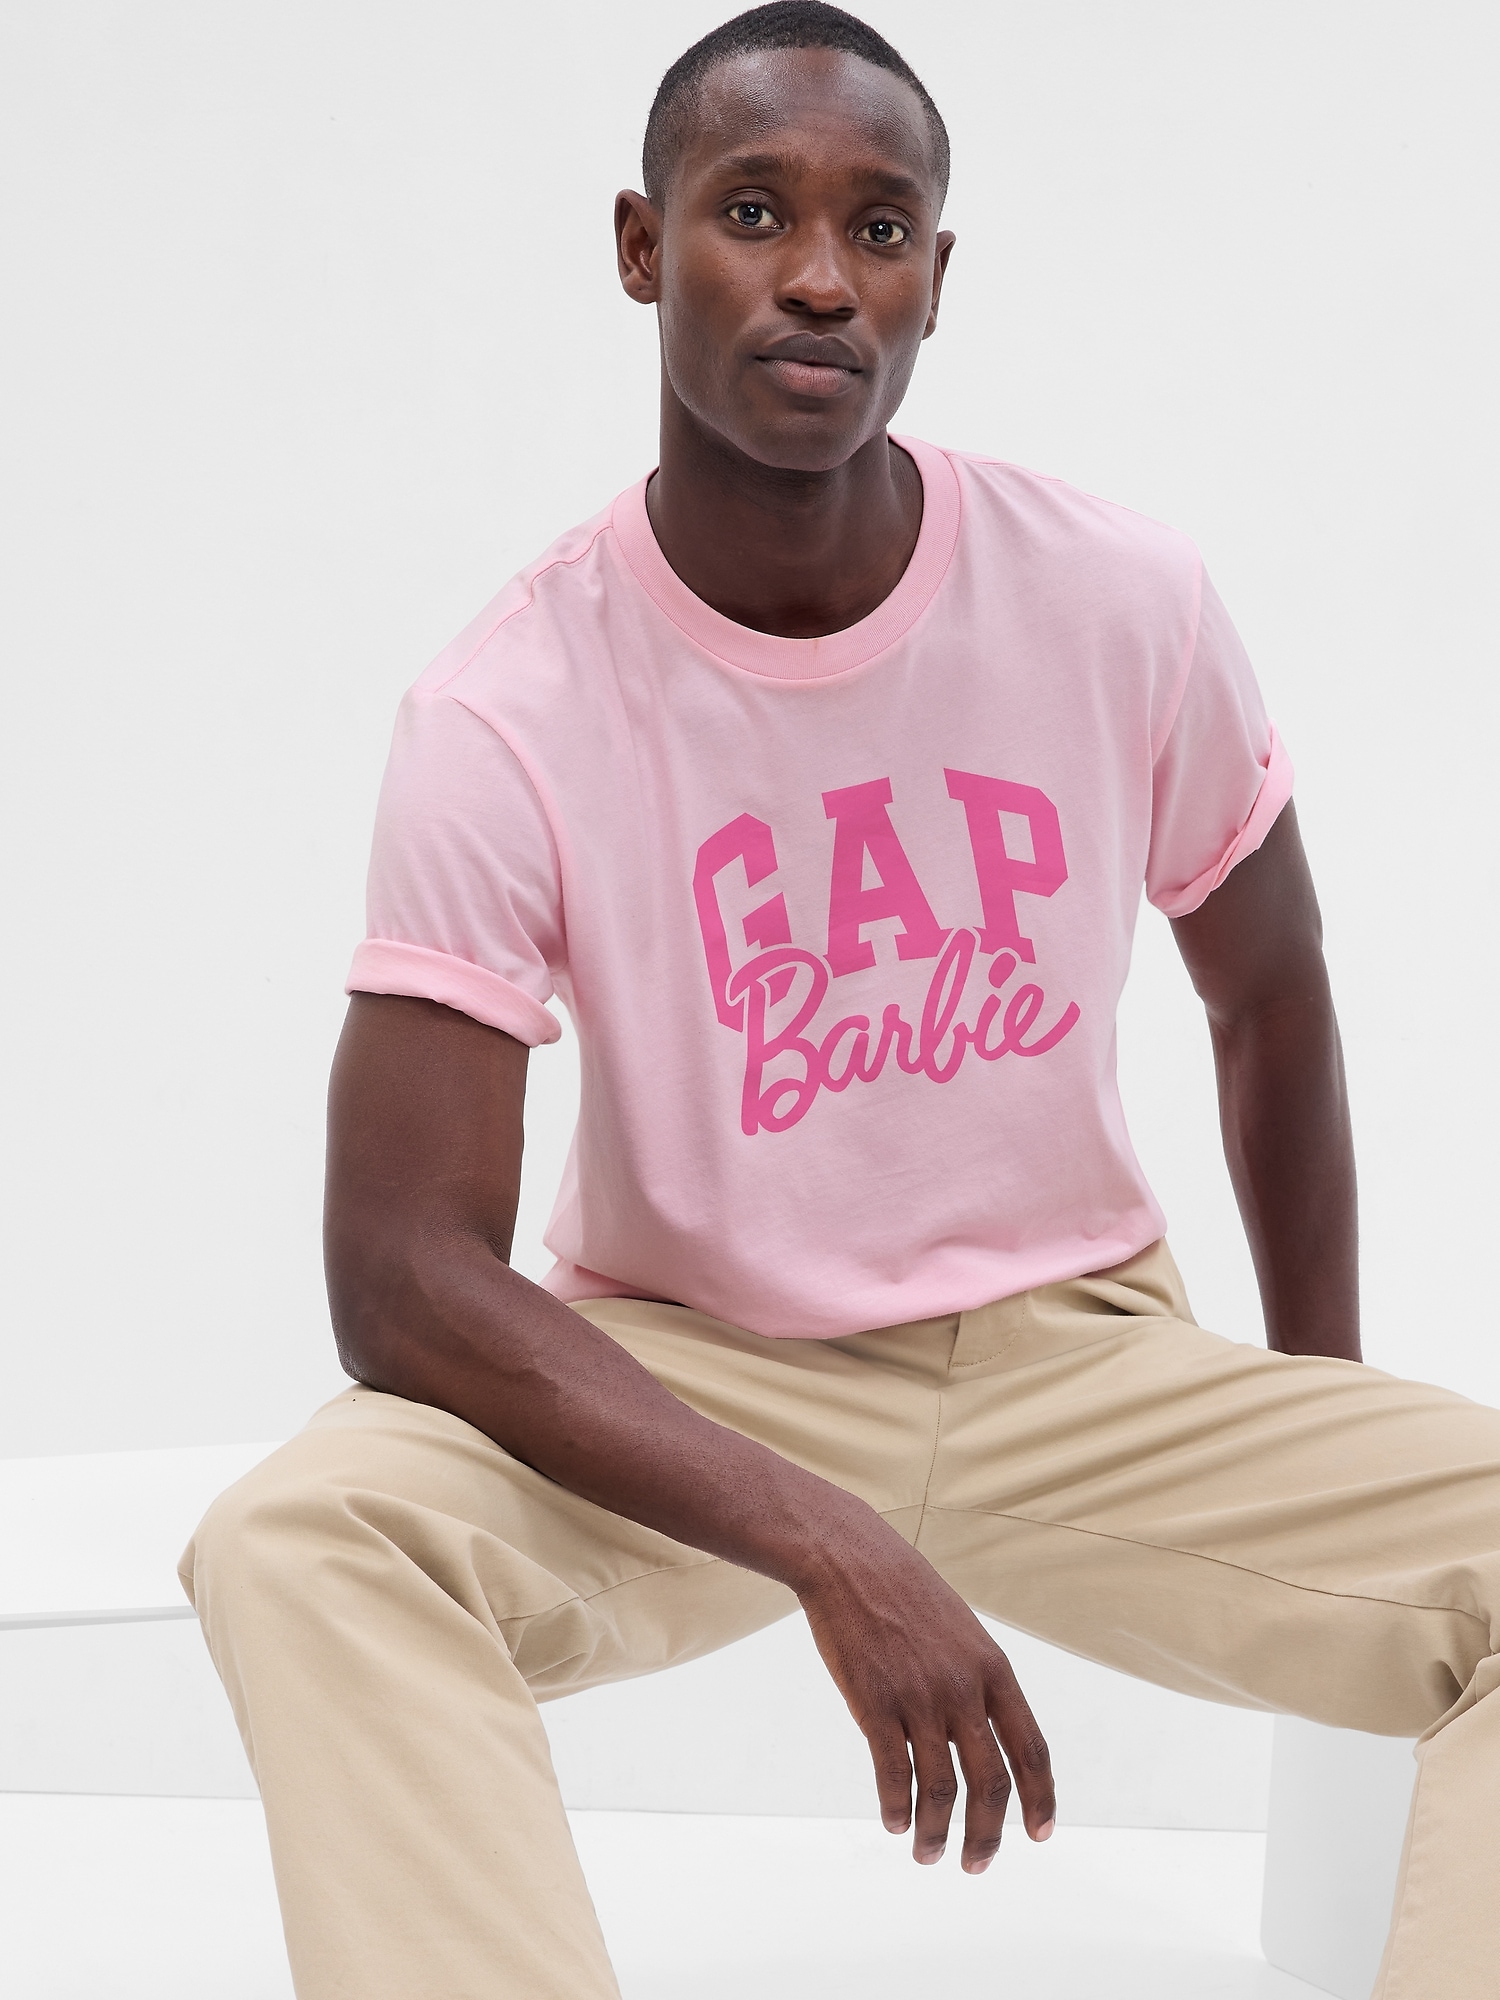 Matching Barbie And Ken Outfits With Gap X Barbie - Your Average Guy